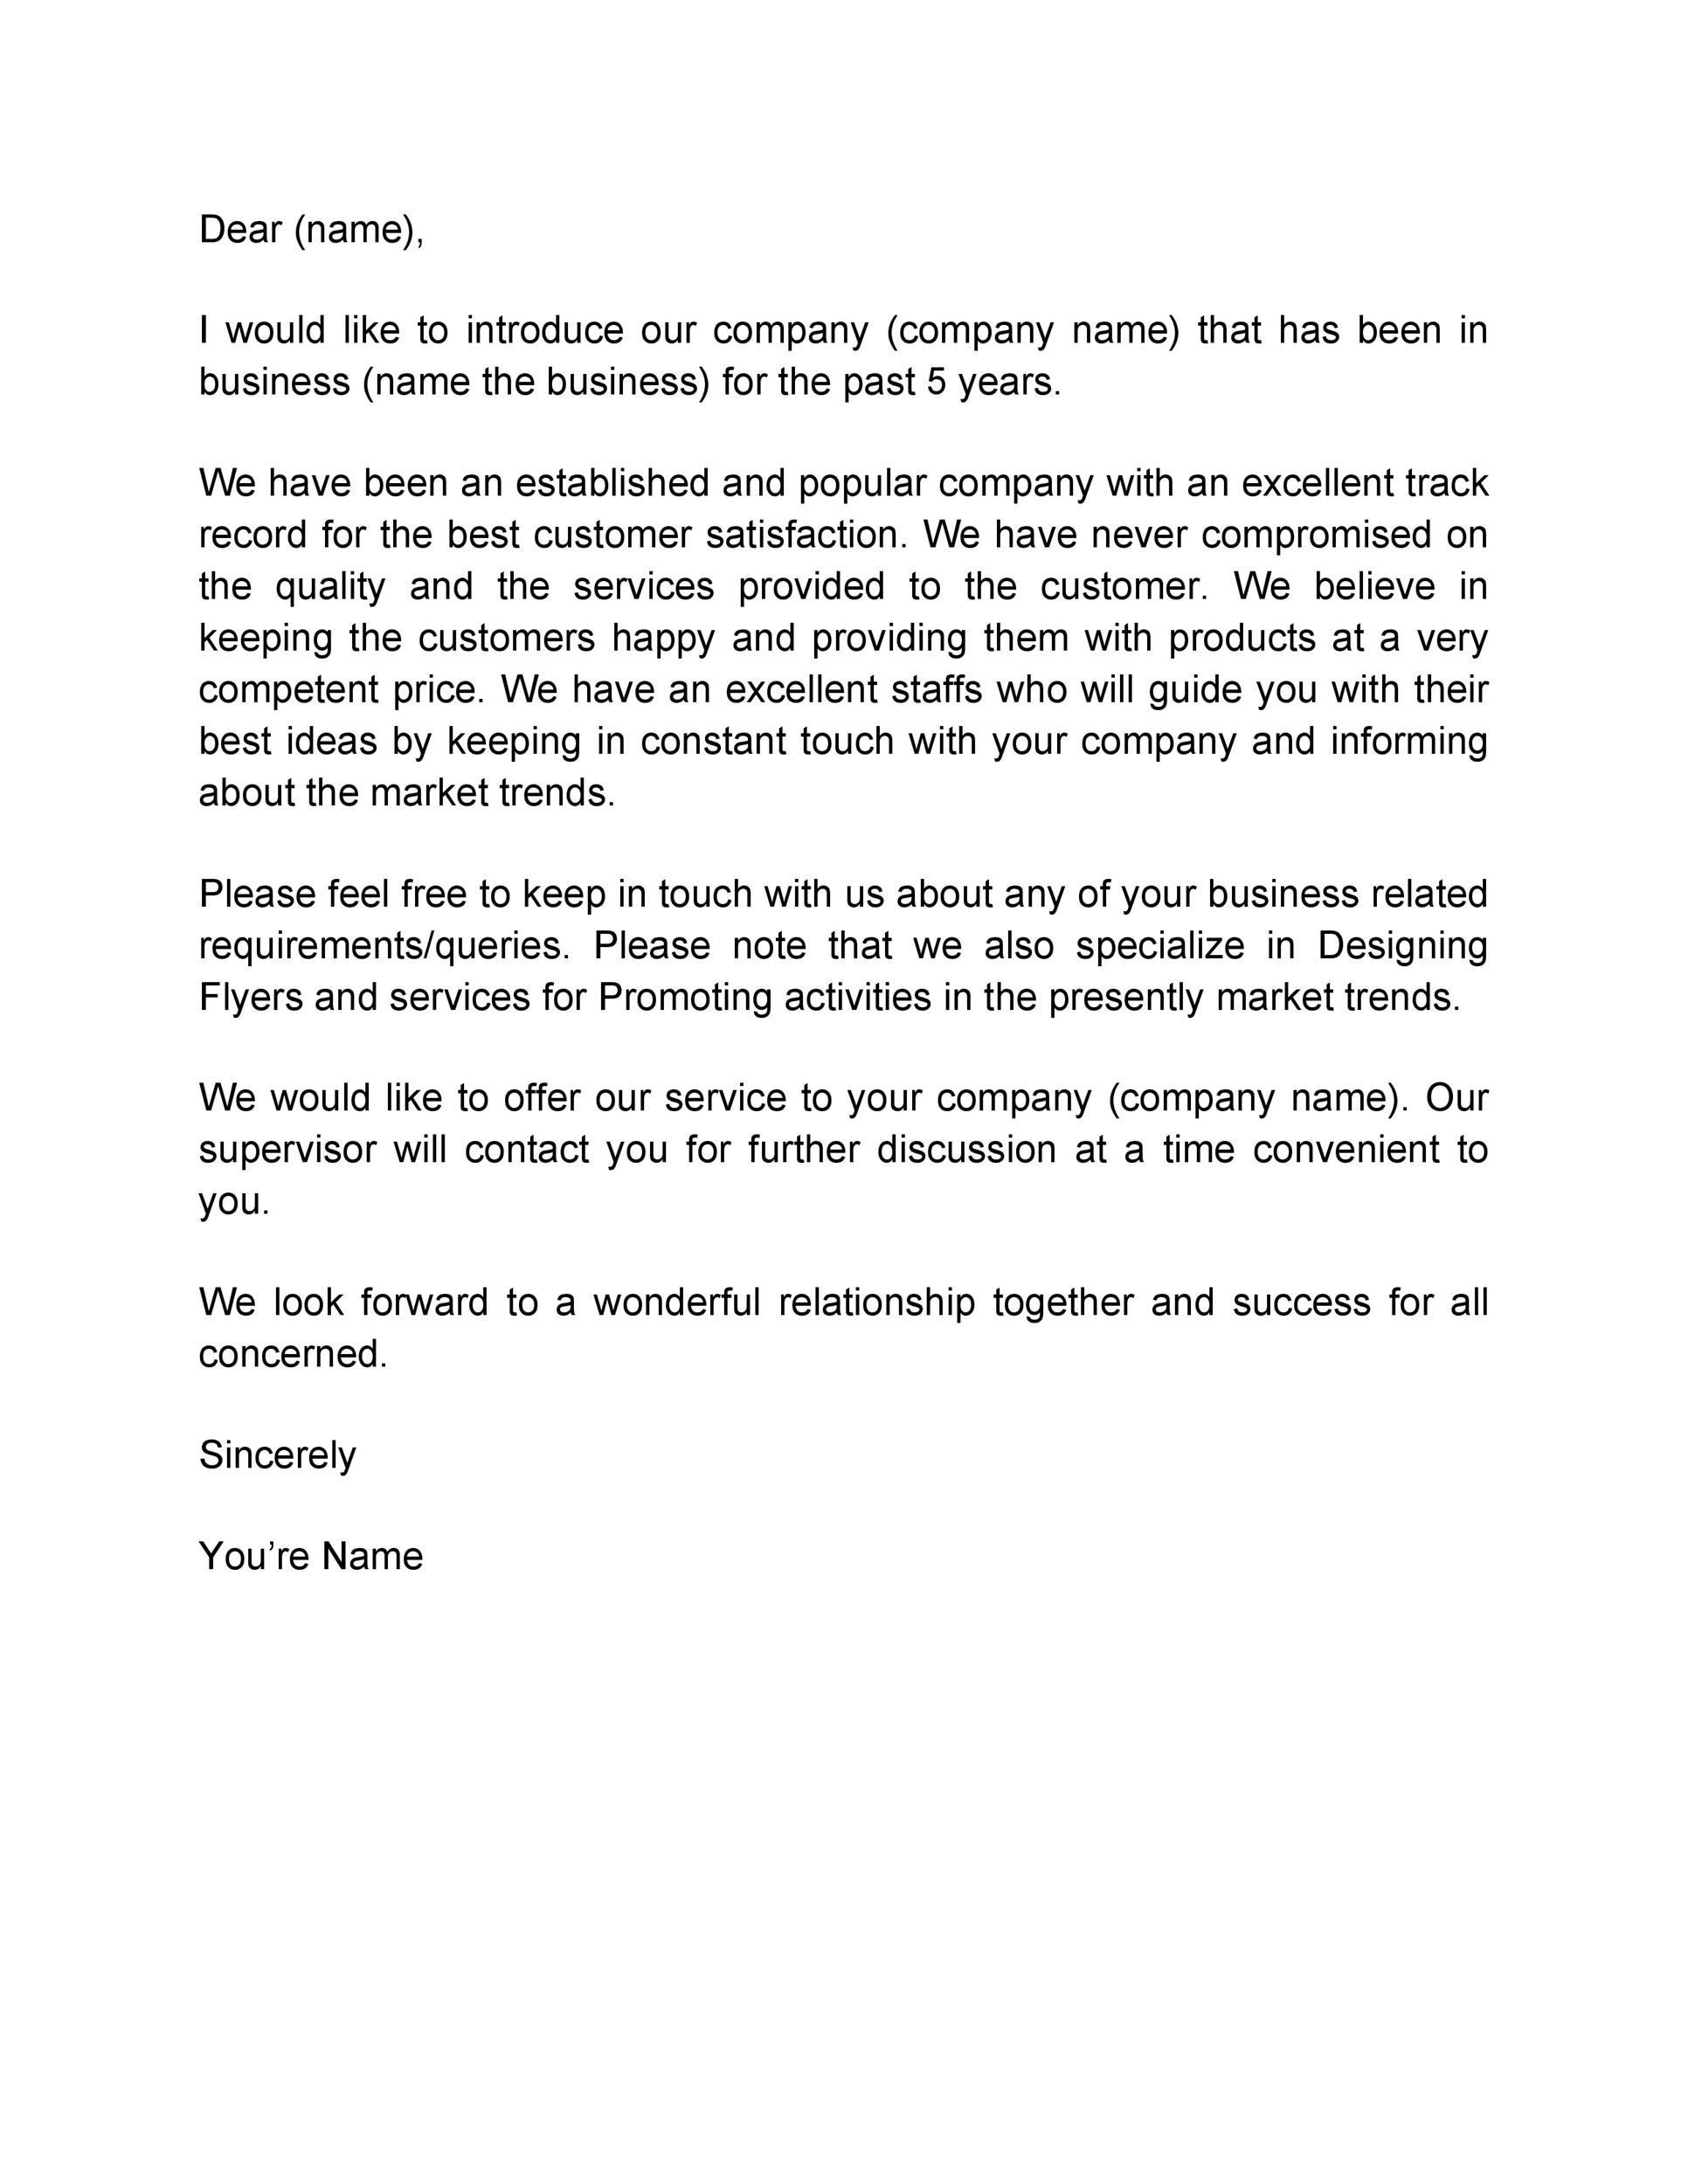 Free business introduction letter 19